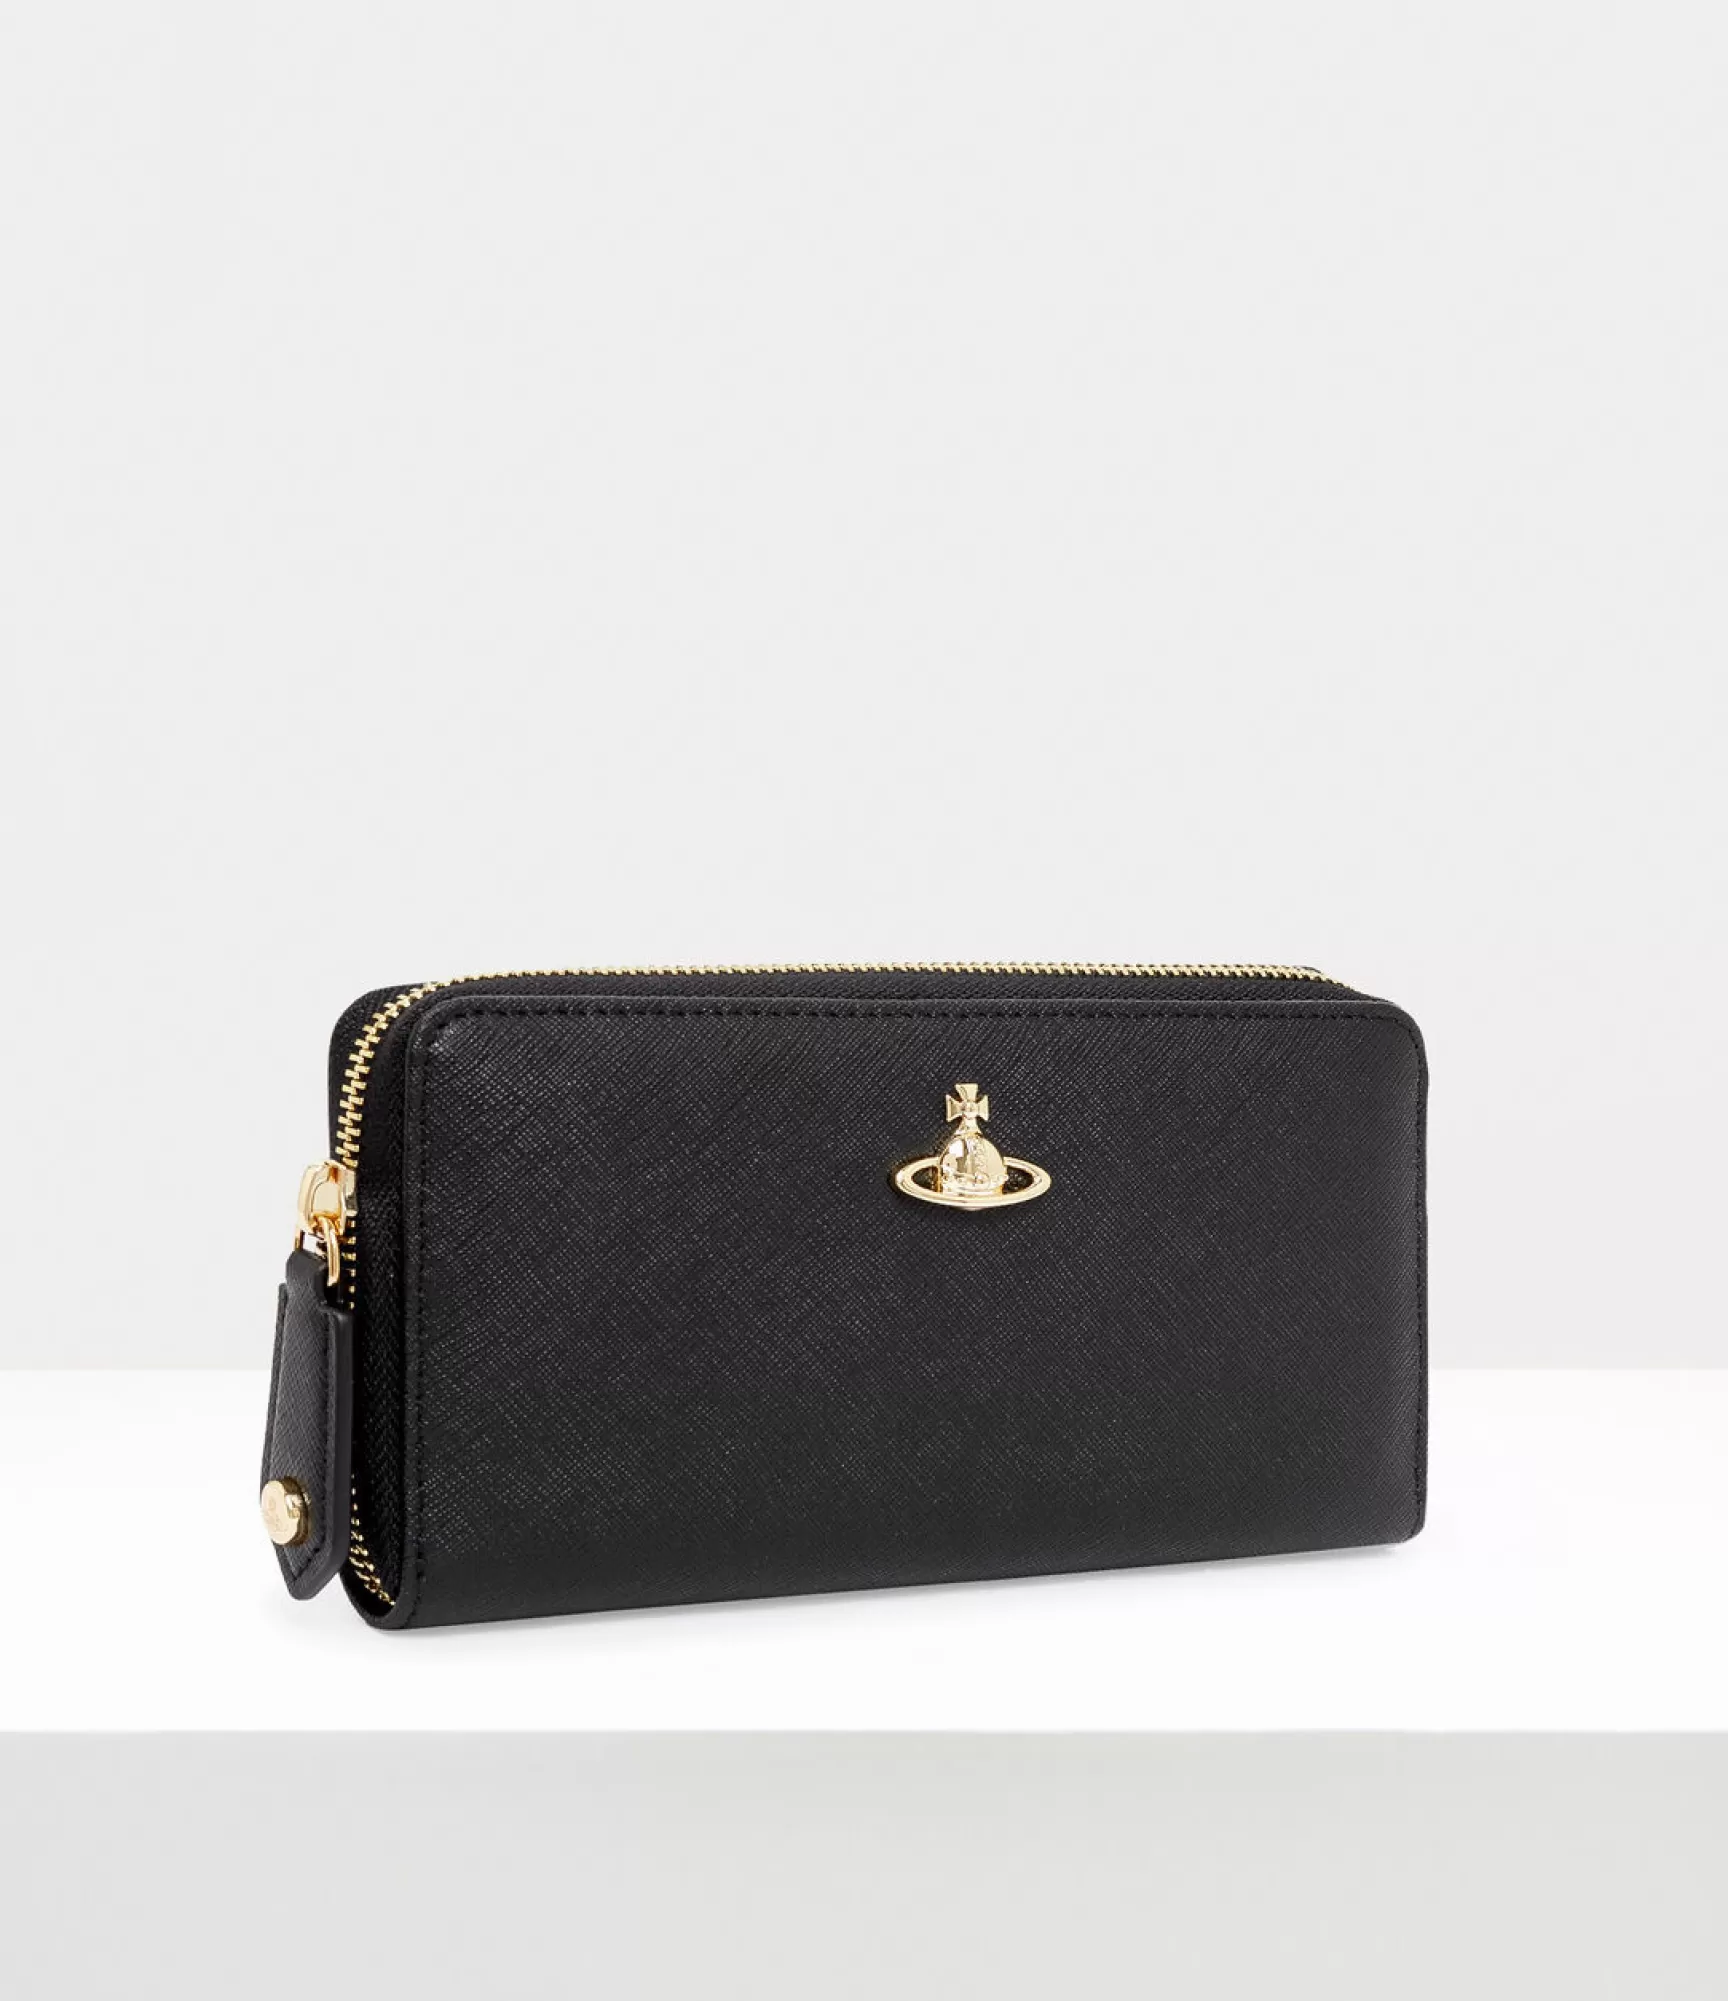 Vivienne Westwood Wallets | Wallets and Purses*Cl zip round wallet Black